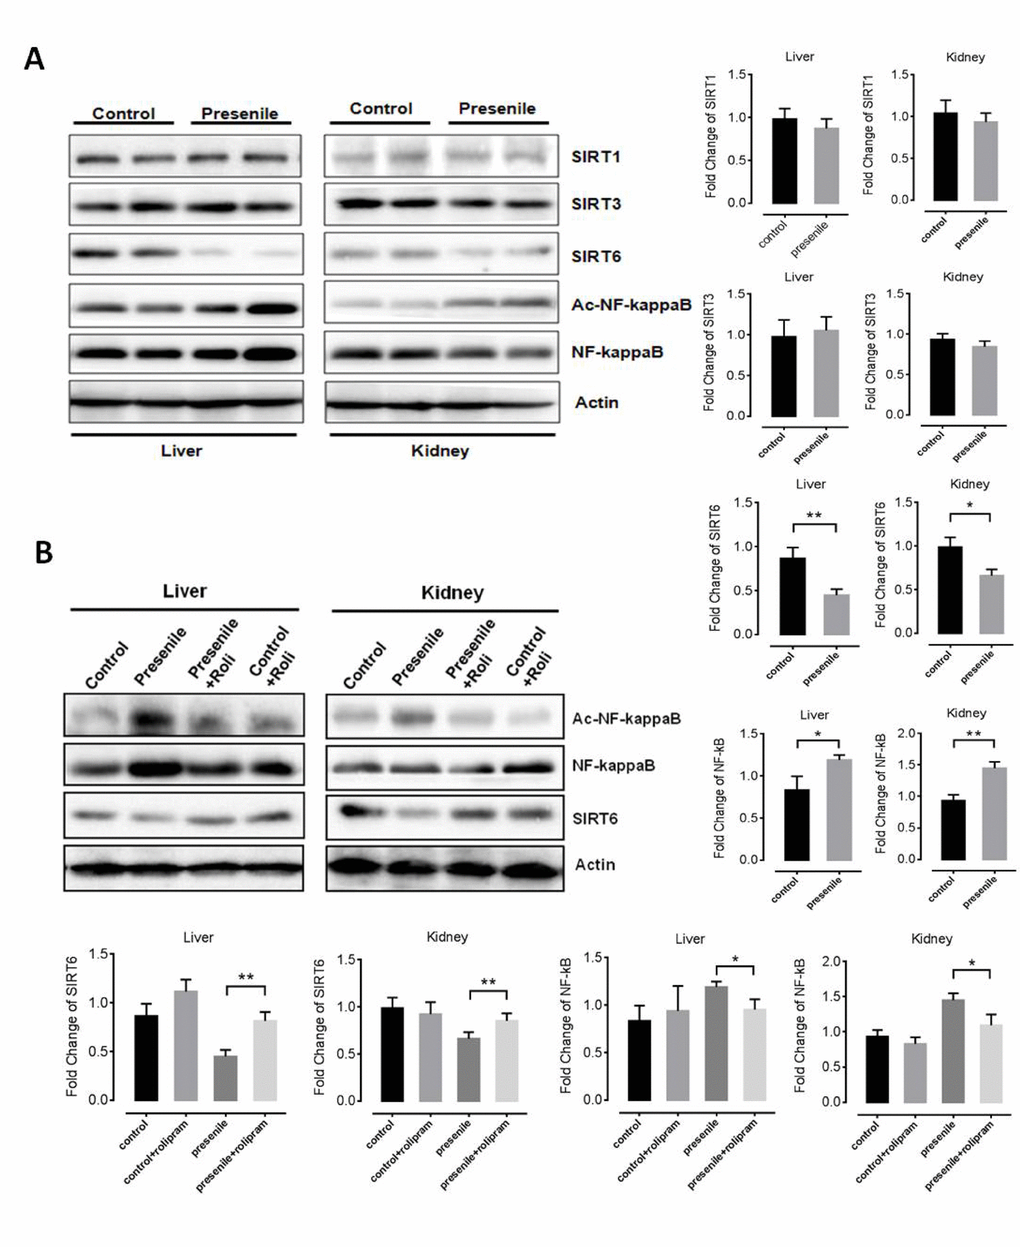 Rolipram increases levels of SIRT6. (A) Western blots results for SIRT1, SIRT3, SIRT6 and acetylated NF-κB in the livers and kidneys of presenile mice. (B) Western blot results for SIRT1, SIRT3, SIRT6 and acetylated NF-κB in the livers and kidneys of presenile mice, with or without rolipram treatment.